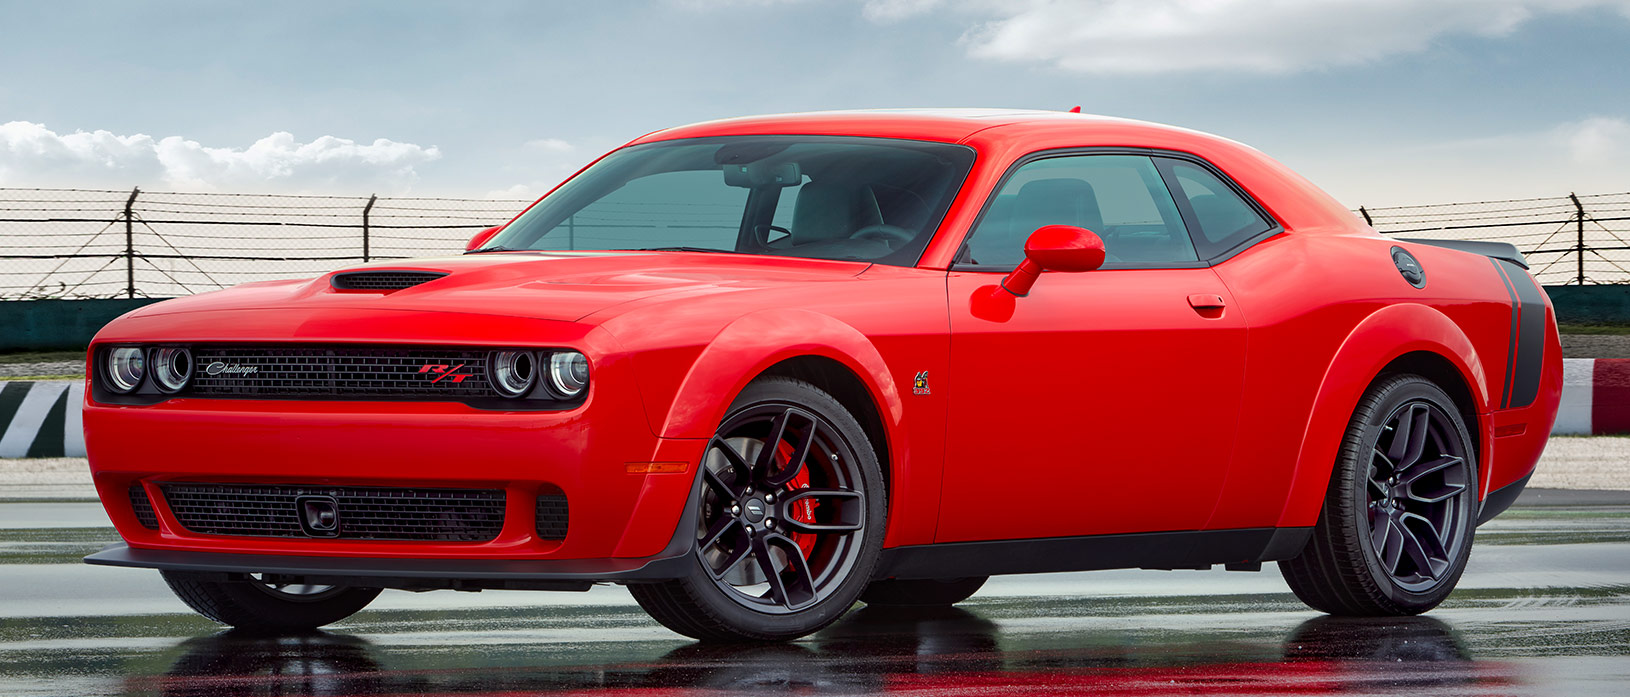 The Dodge Challenger is King of the Muscle Cars